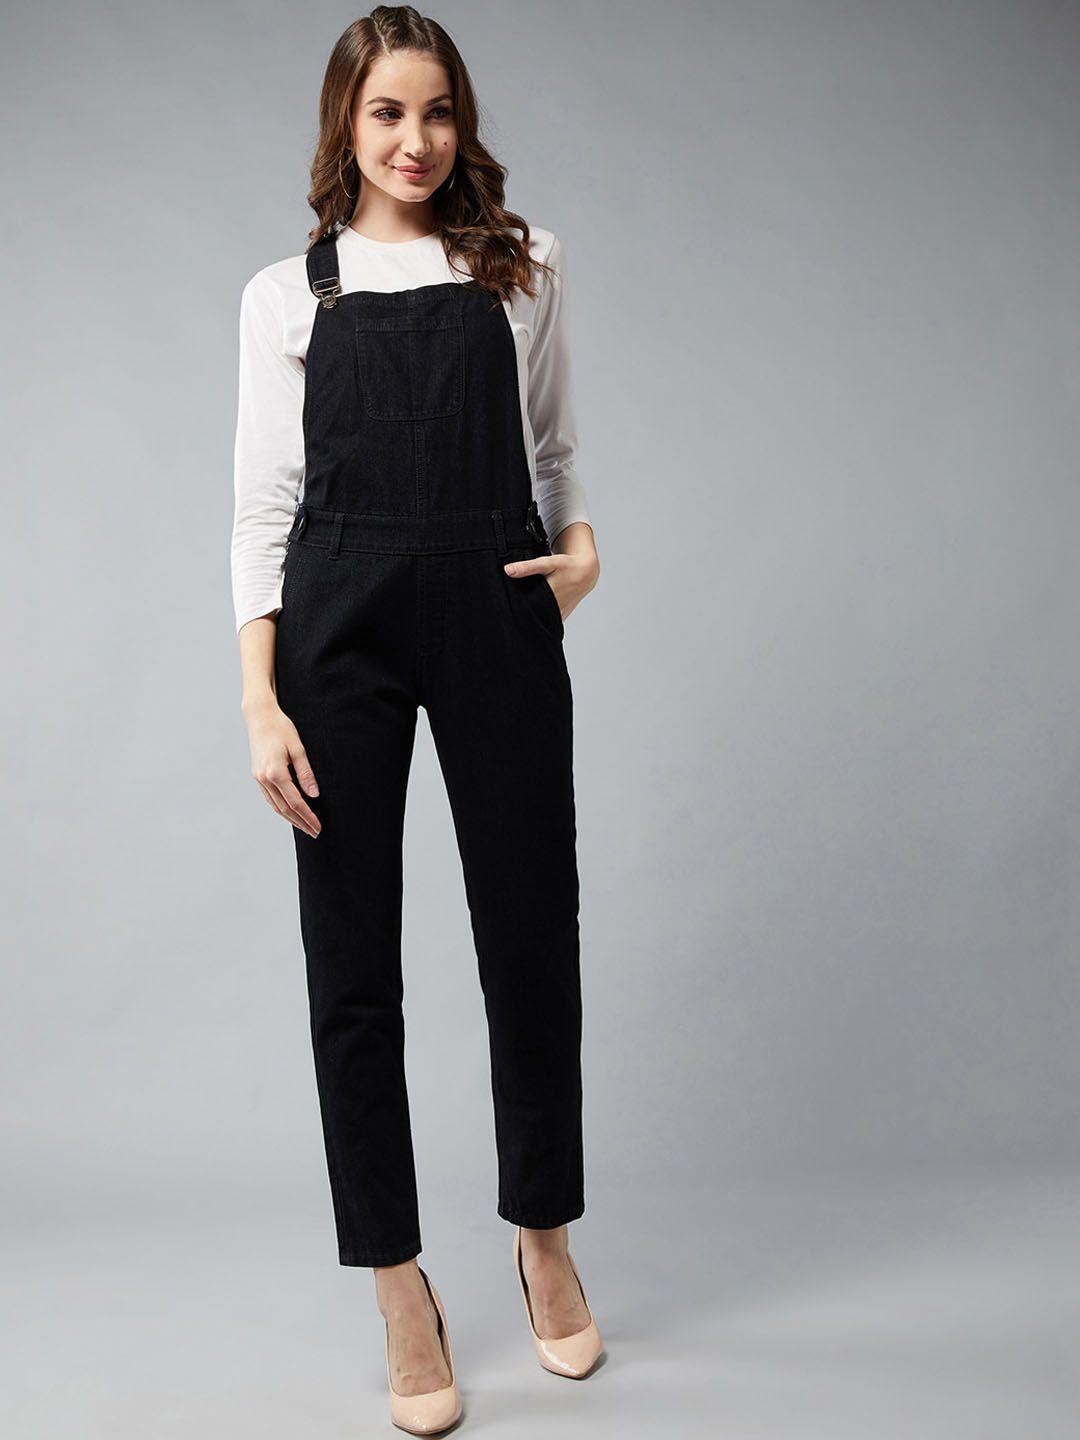 dolce crudo black & white skinny fit denim dungarees with t shirt